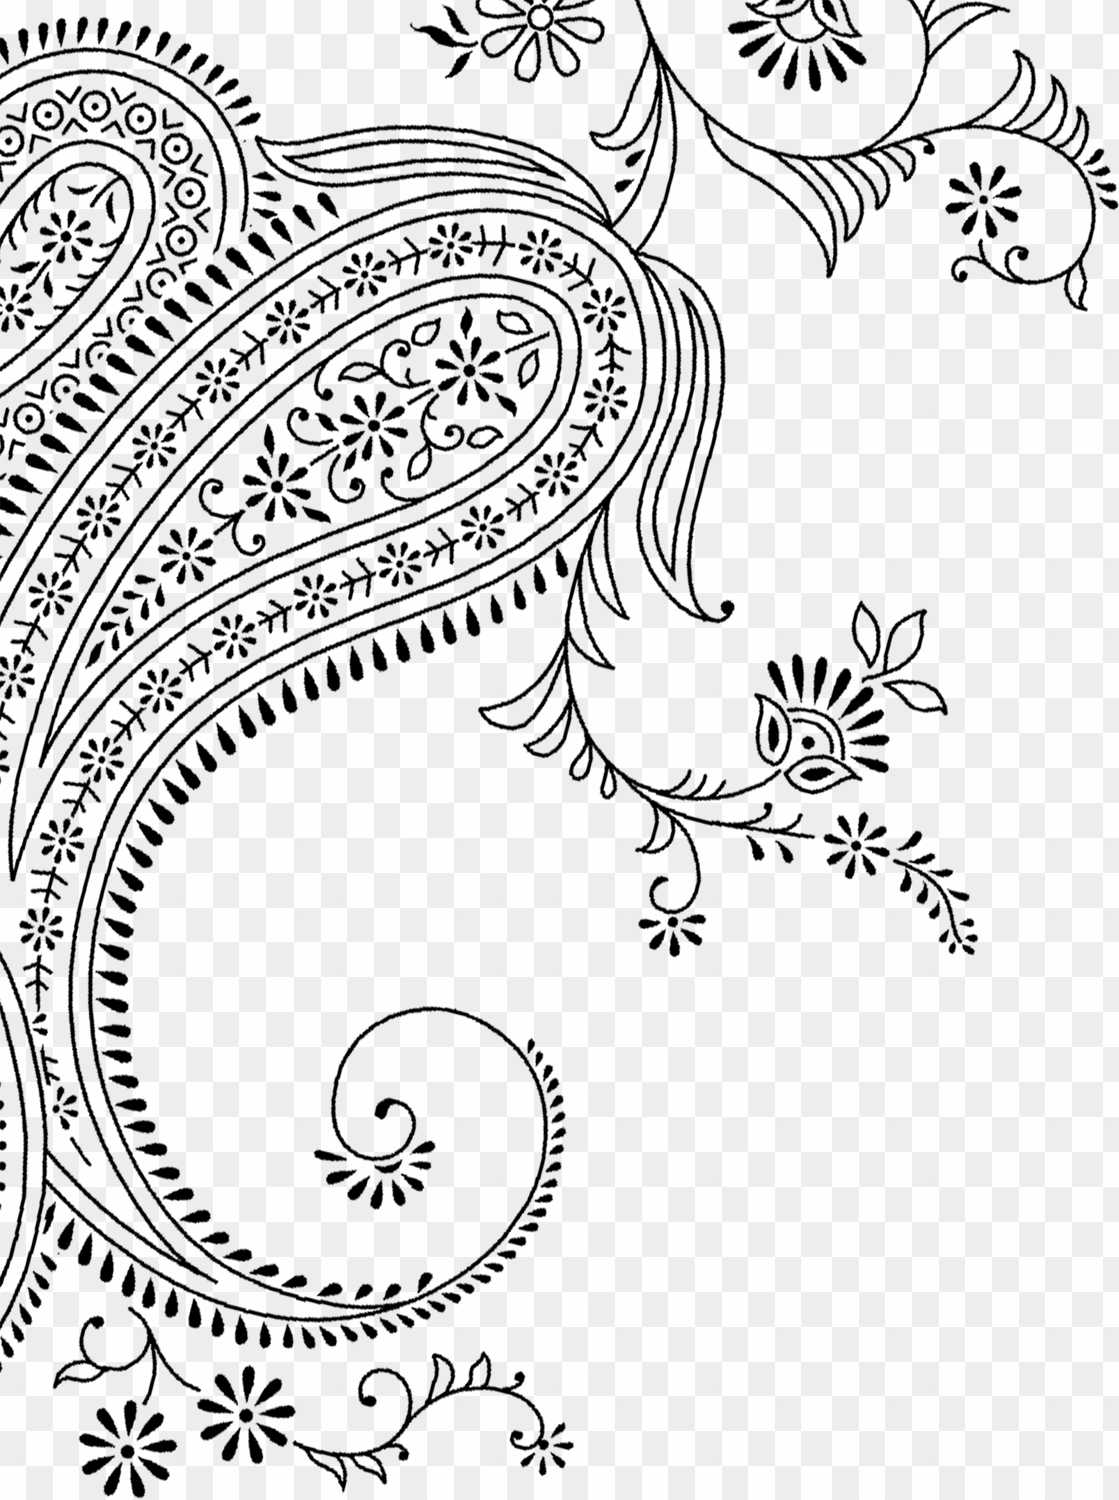 Banner editing flower Balck png images - transparent background PNG  cliparts free download | AllPNGFree